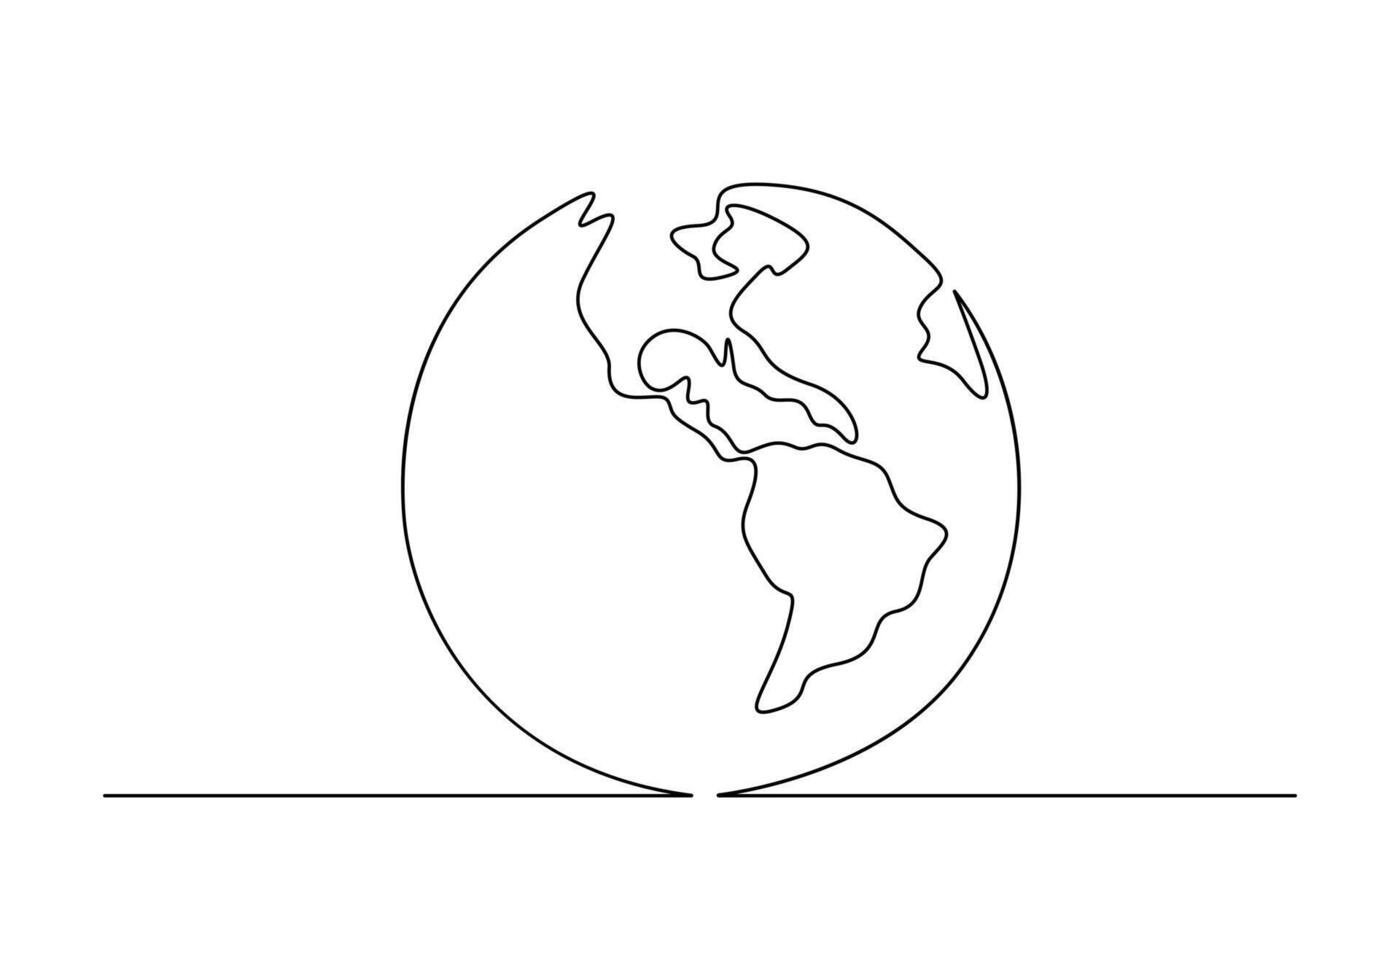 World map continuous one line drawing of earth globe vector illustration